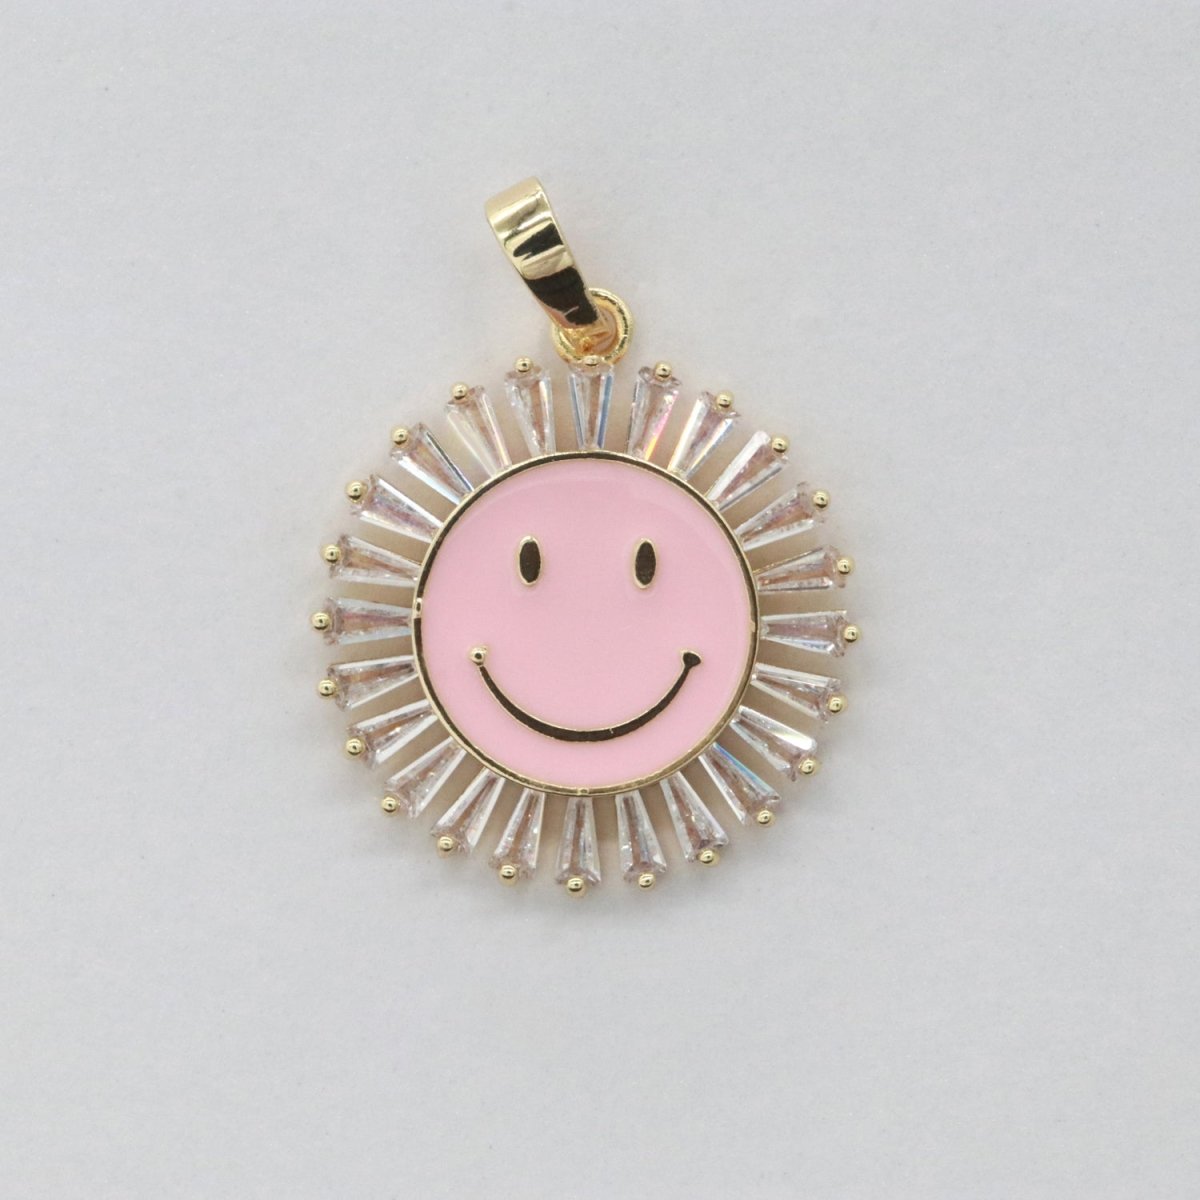 Round Smiley Face Charm Cubic Happy Face Pendant for Necklace Earring Component I-424 I-438 I-441 I-443 I-614 I-757 - DLUXCA